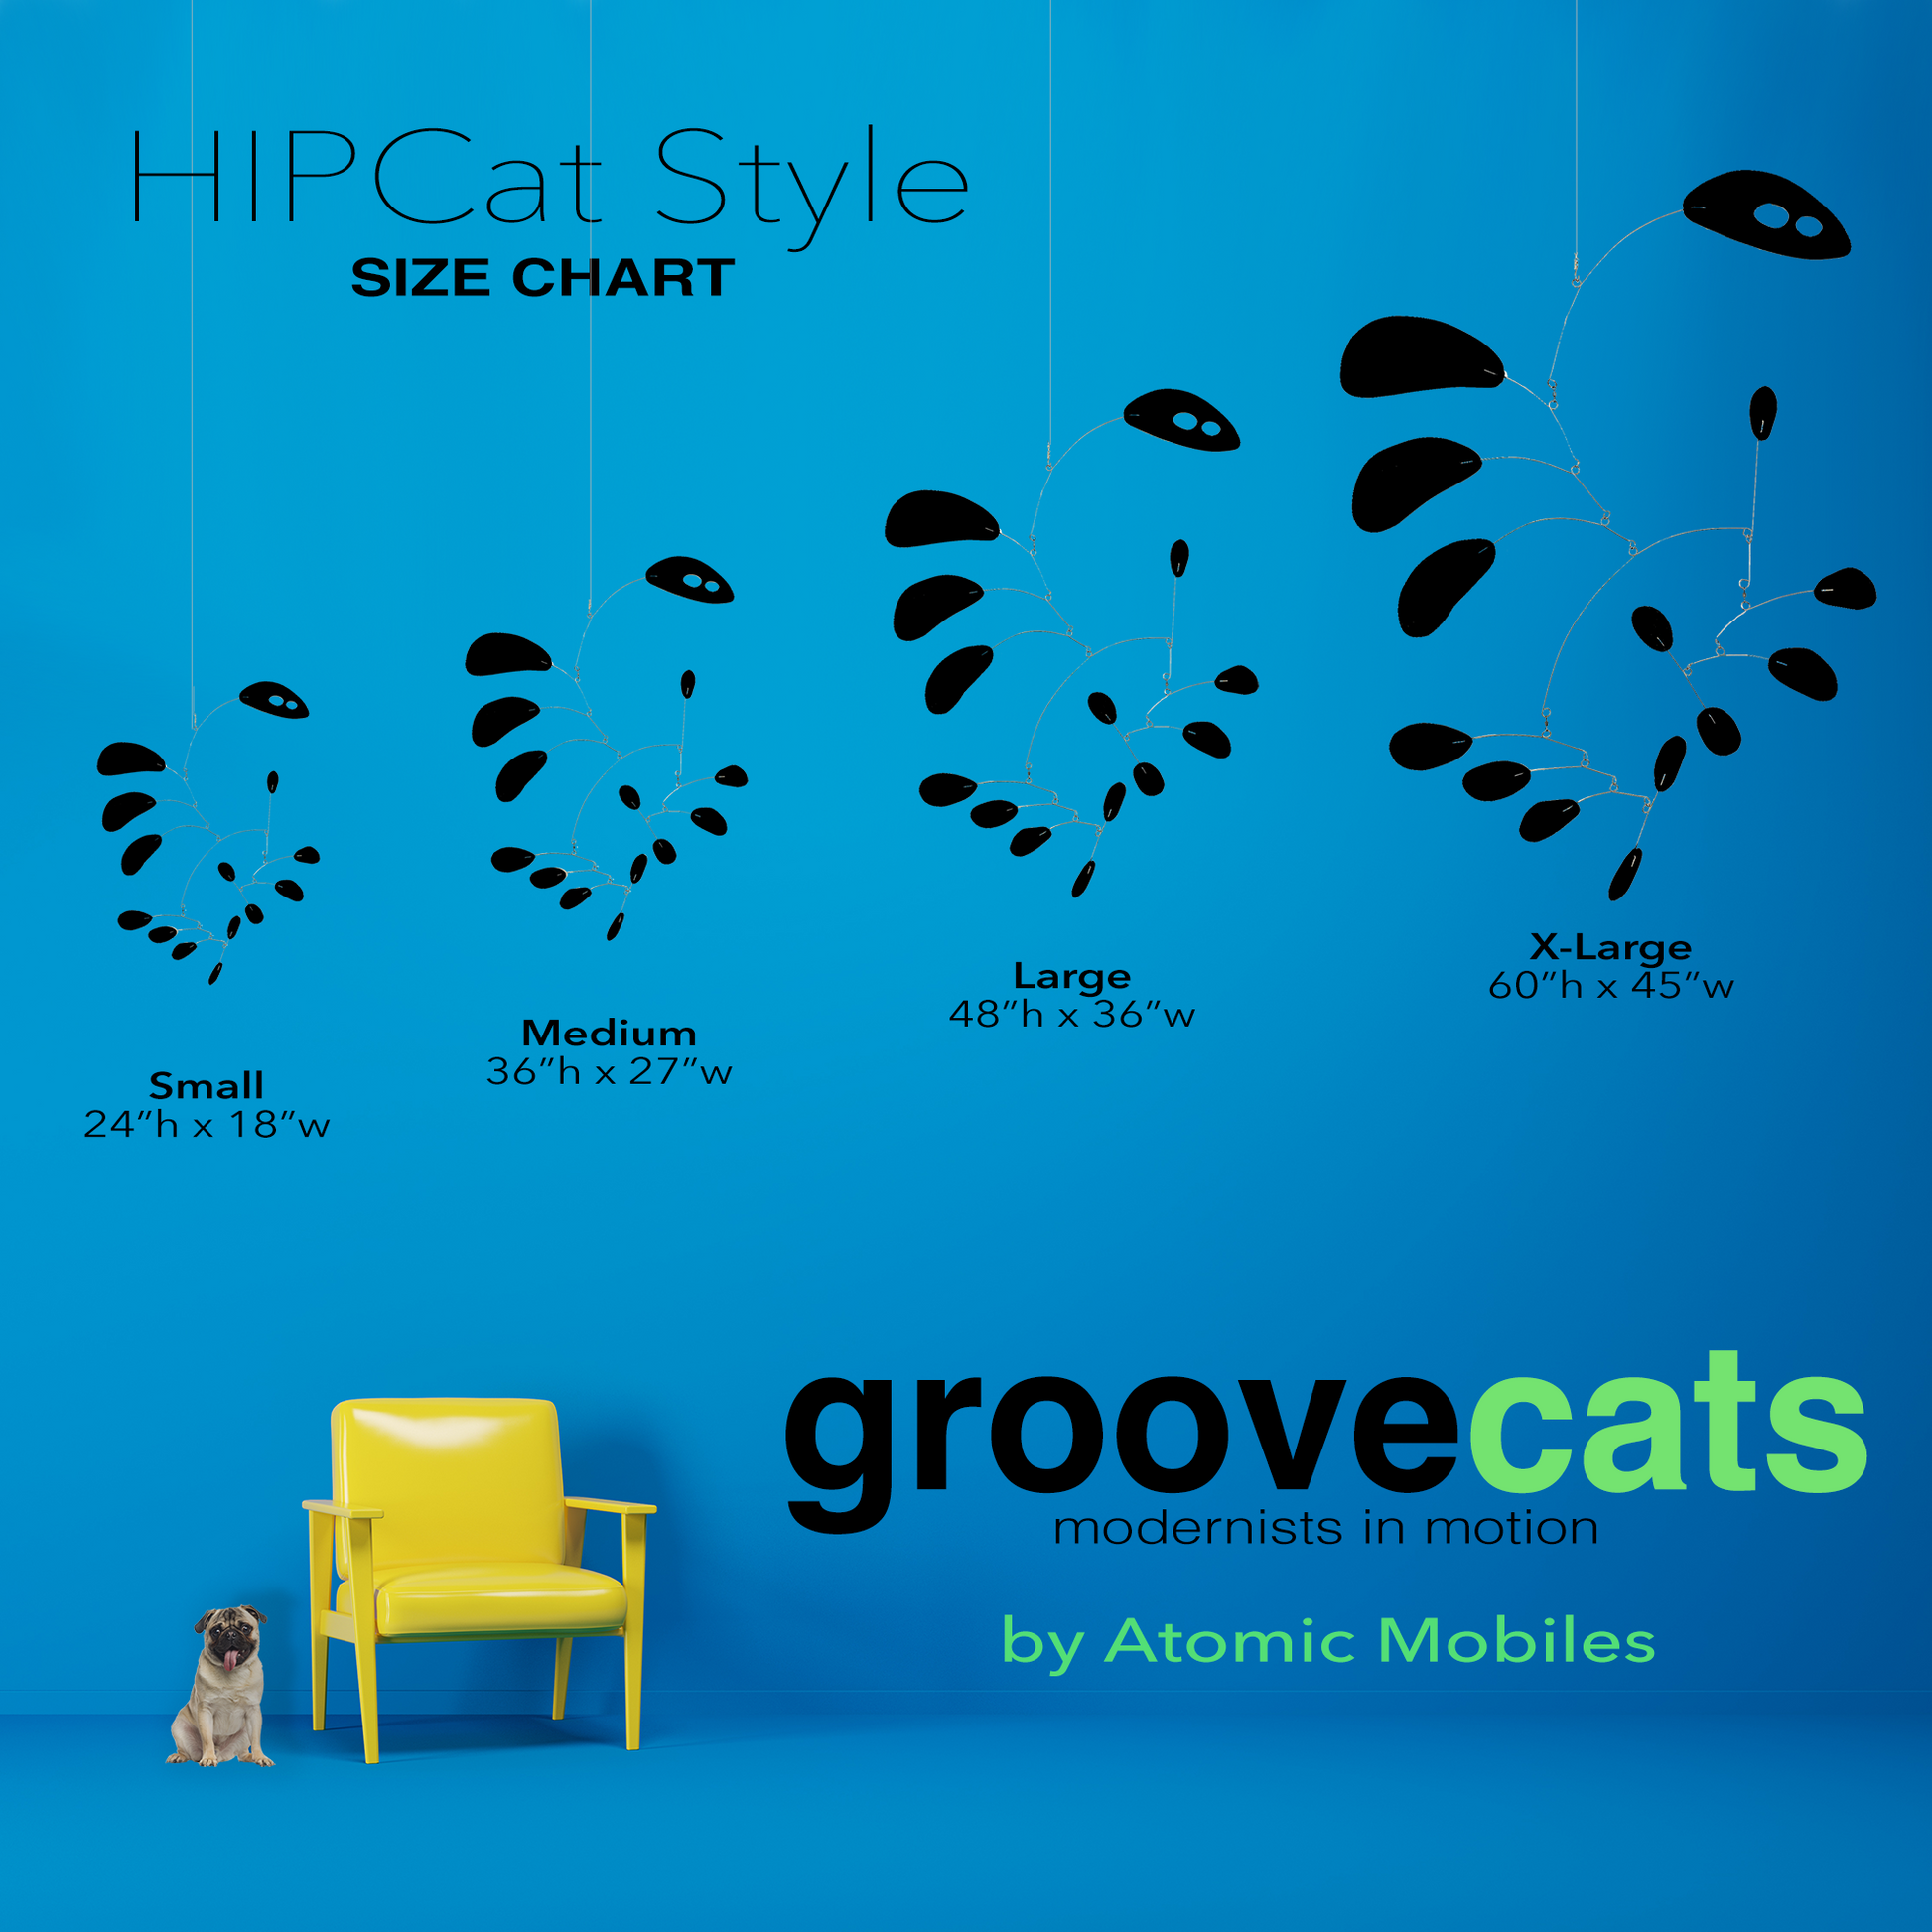 Size Chart for GrooveCats hanging art mobile in HipCat Style with yellow chair and cute pug dog- handmade mid century modern kinetic art by AtomicMobiles.com